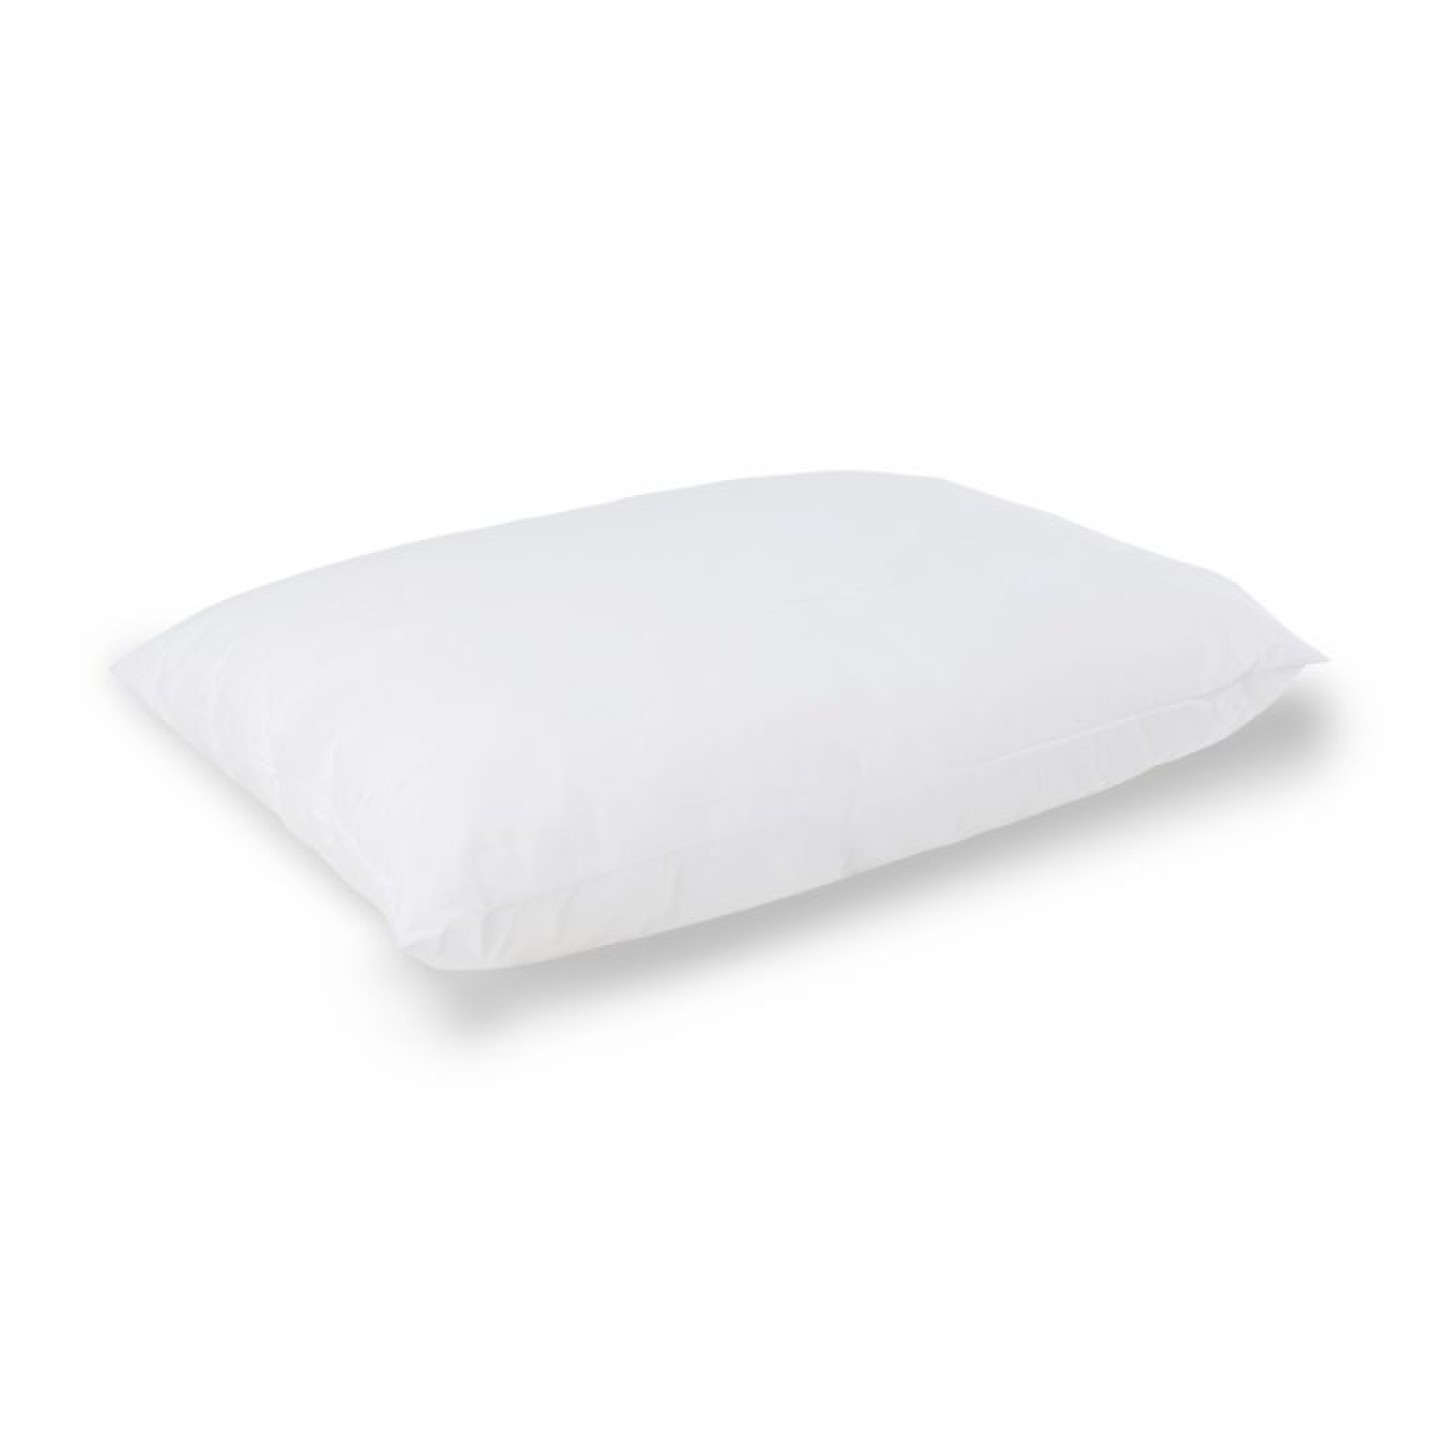 THE UGLY DUCKLING 800gr PILLOW